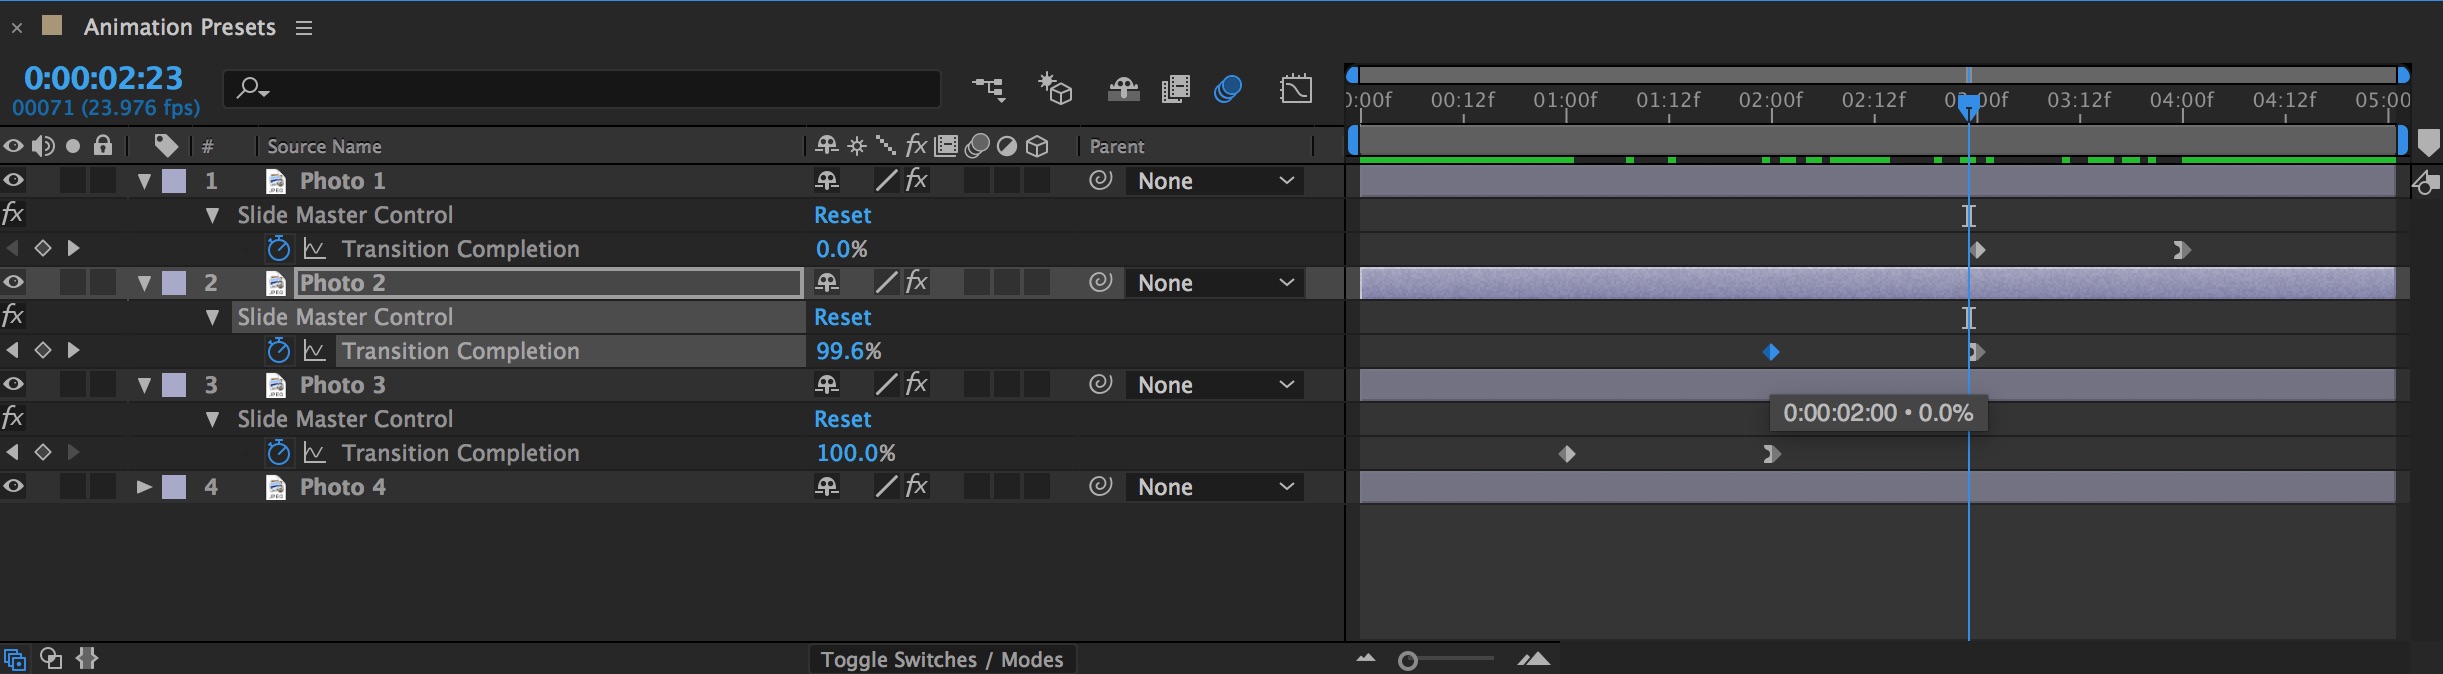 How to Apply Animation Presets in Adobe After Effects — Fine Tuning